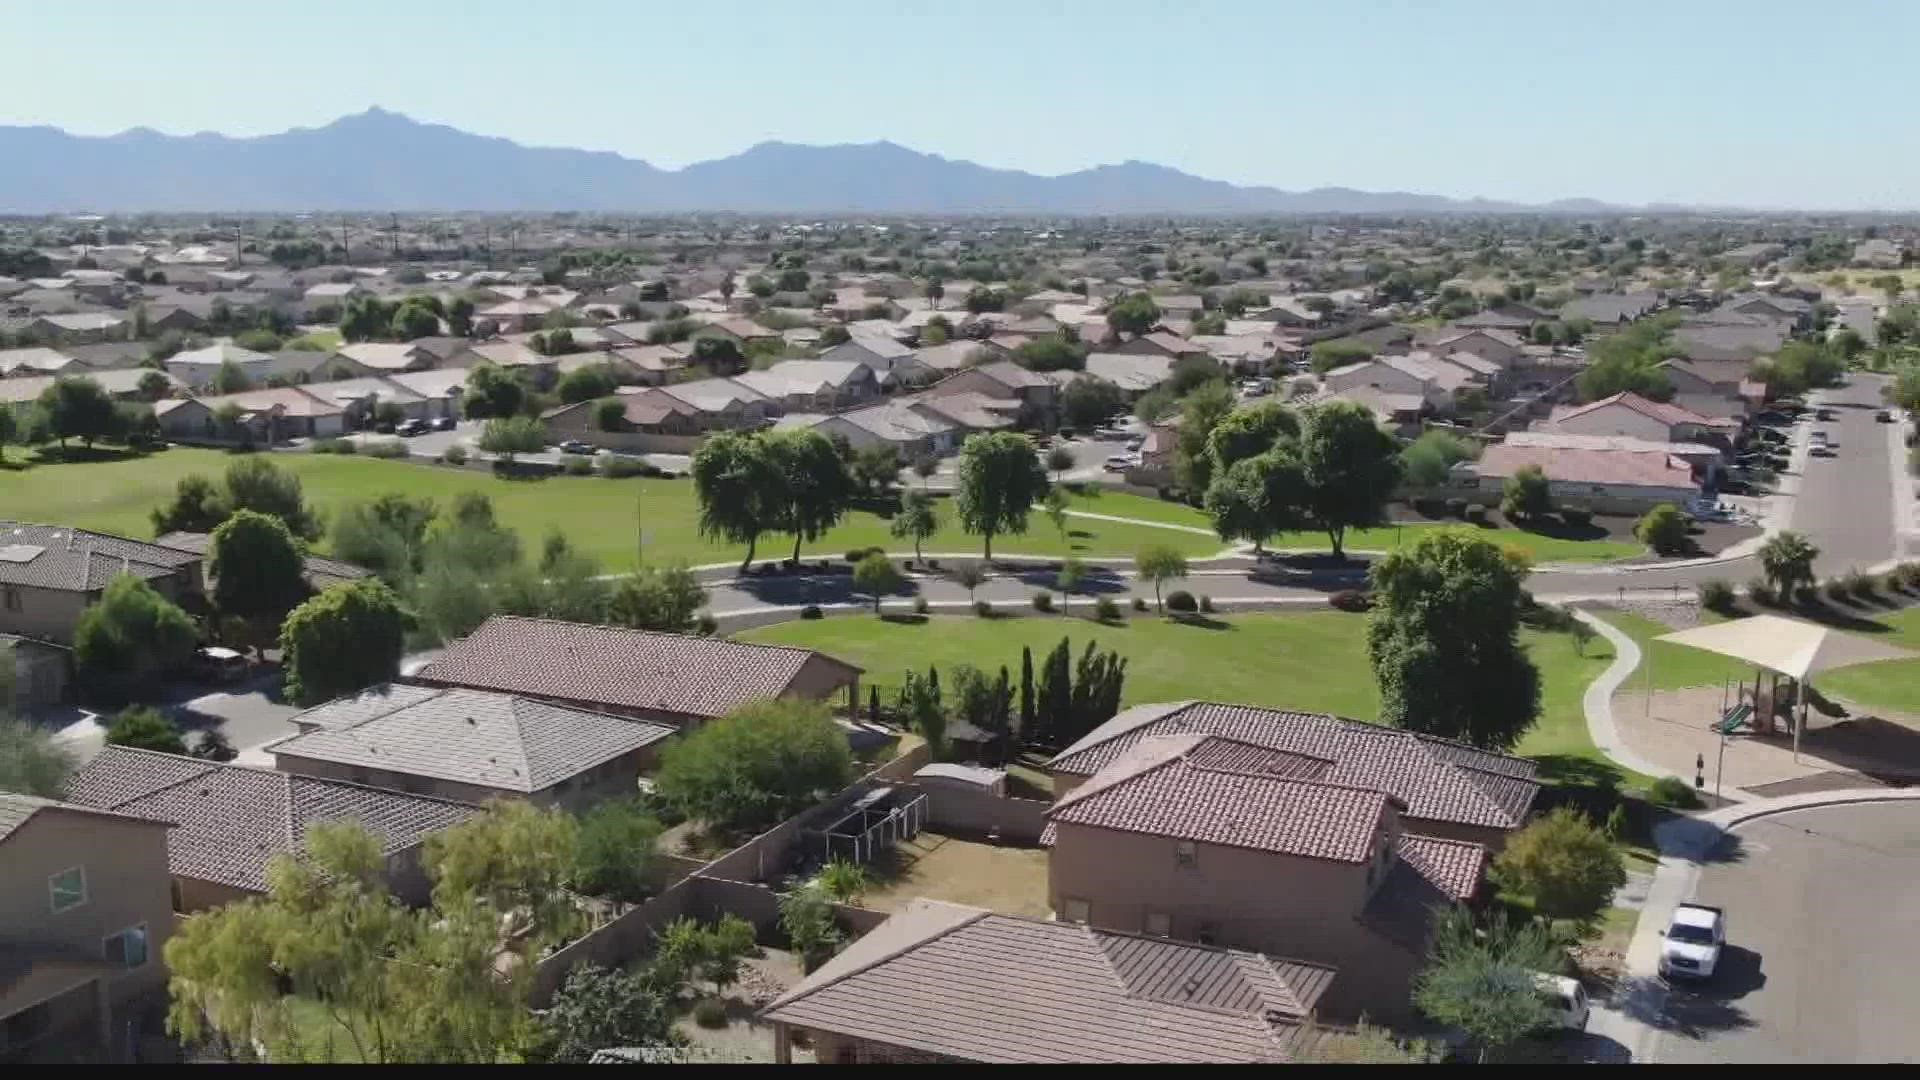 But new data from RE/MAX shows the number of new listings in Phoenix jumped 34% compared to June last year more than any other metro area in the country.